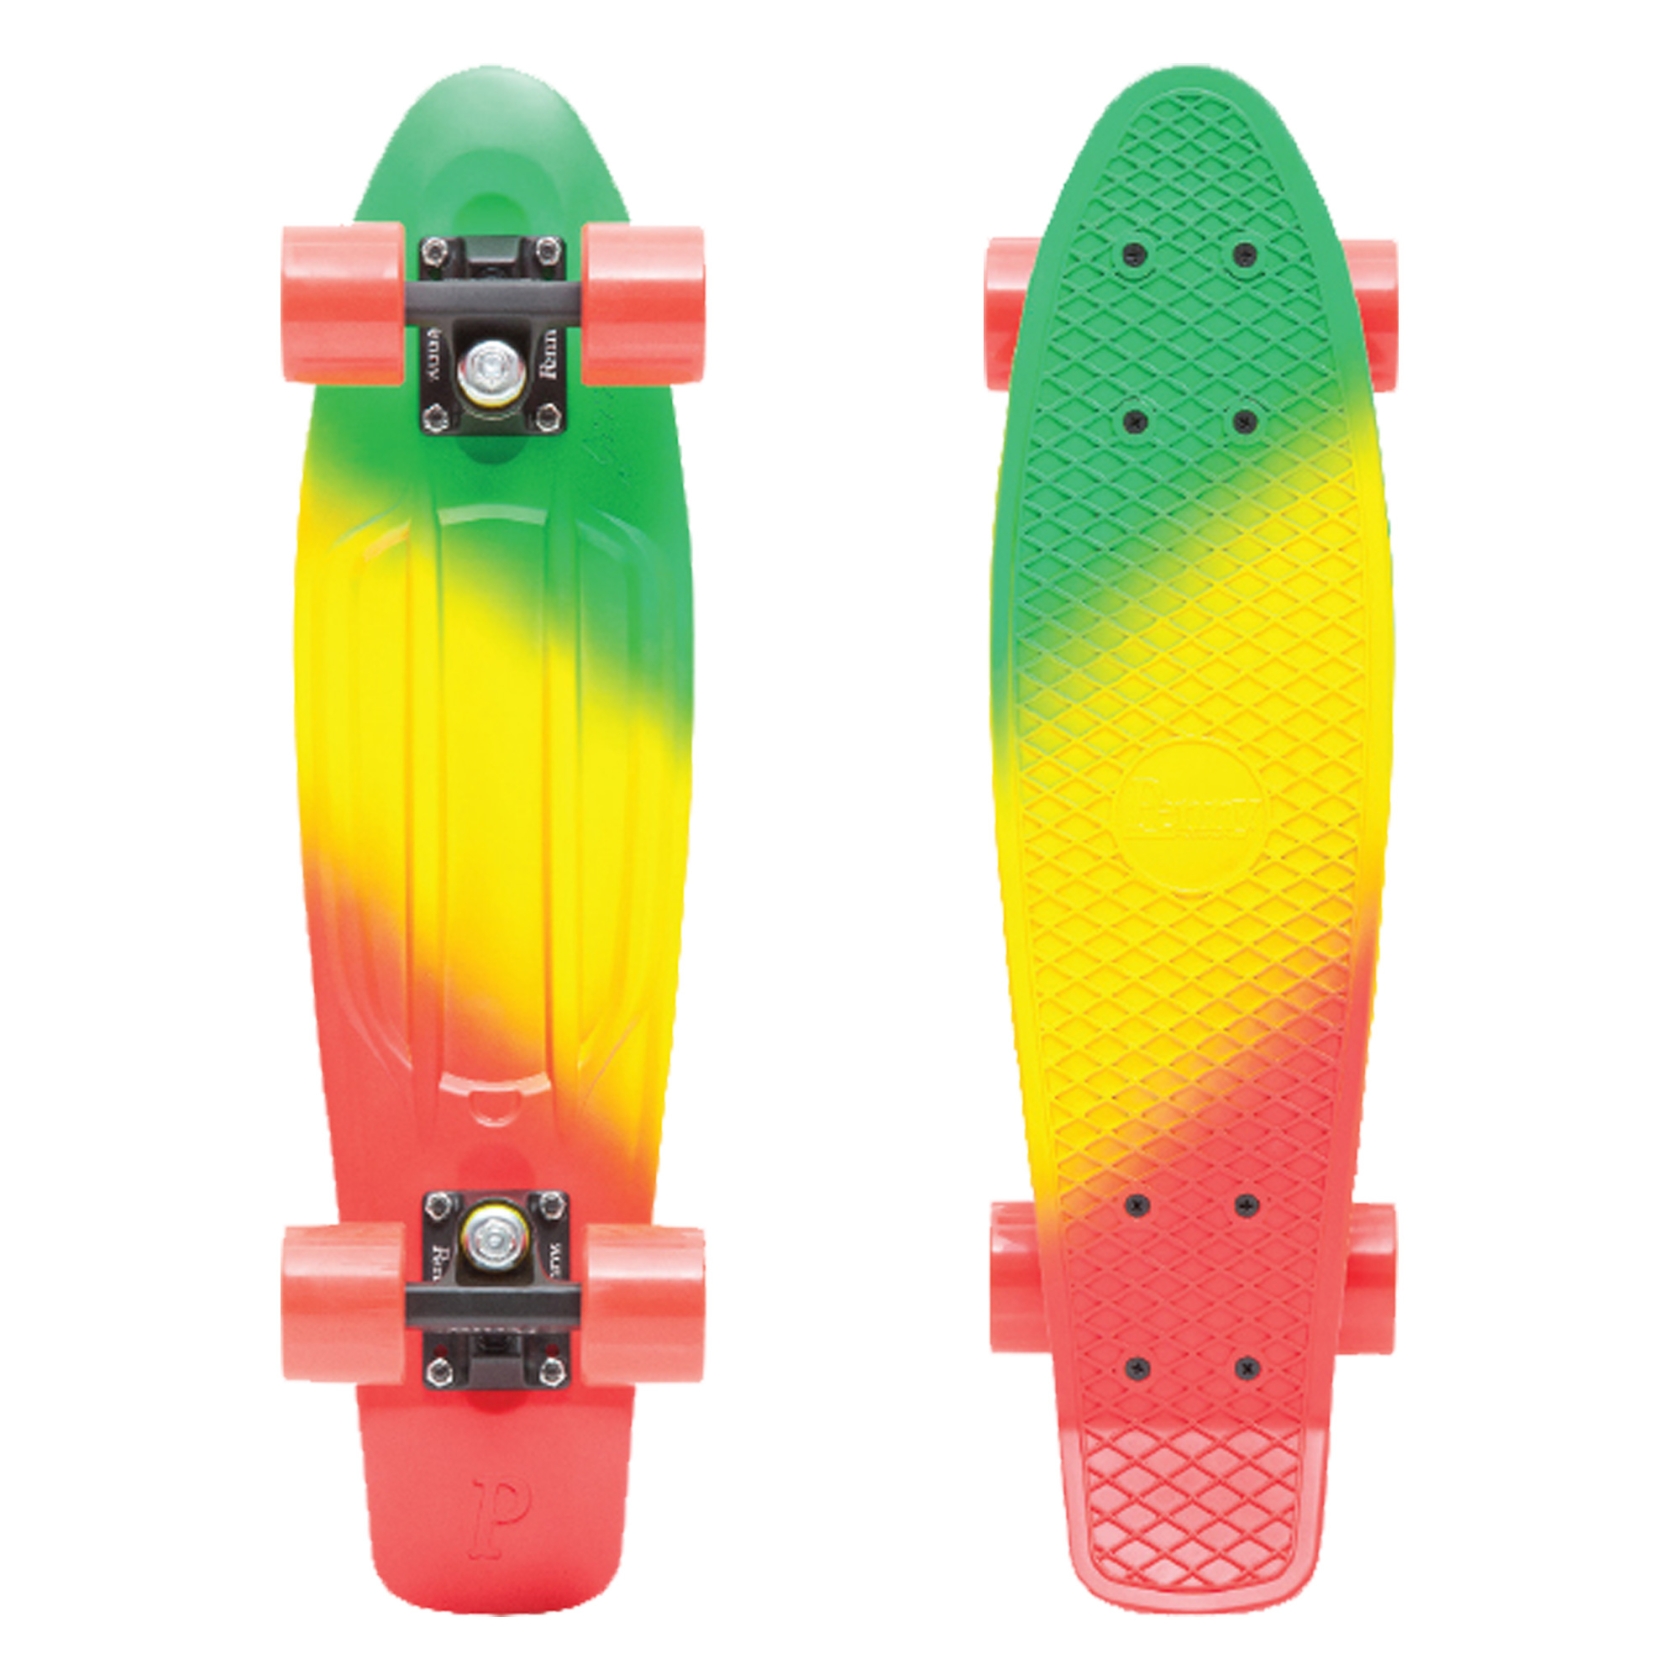 PENNY Complete 22 FADES SERIES Skateboard, green/yellow/red (jammin) One Size